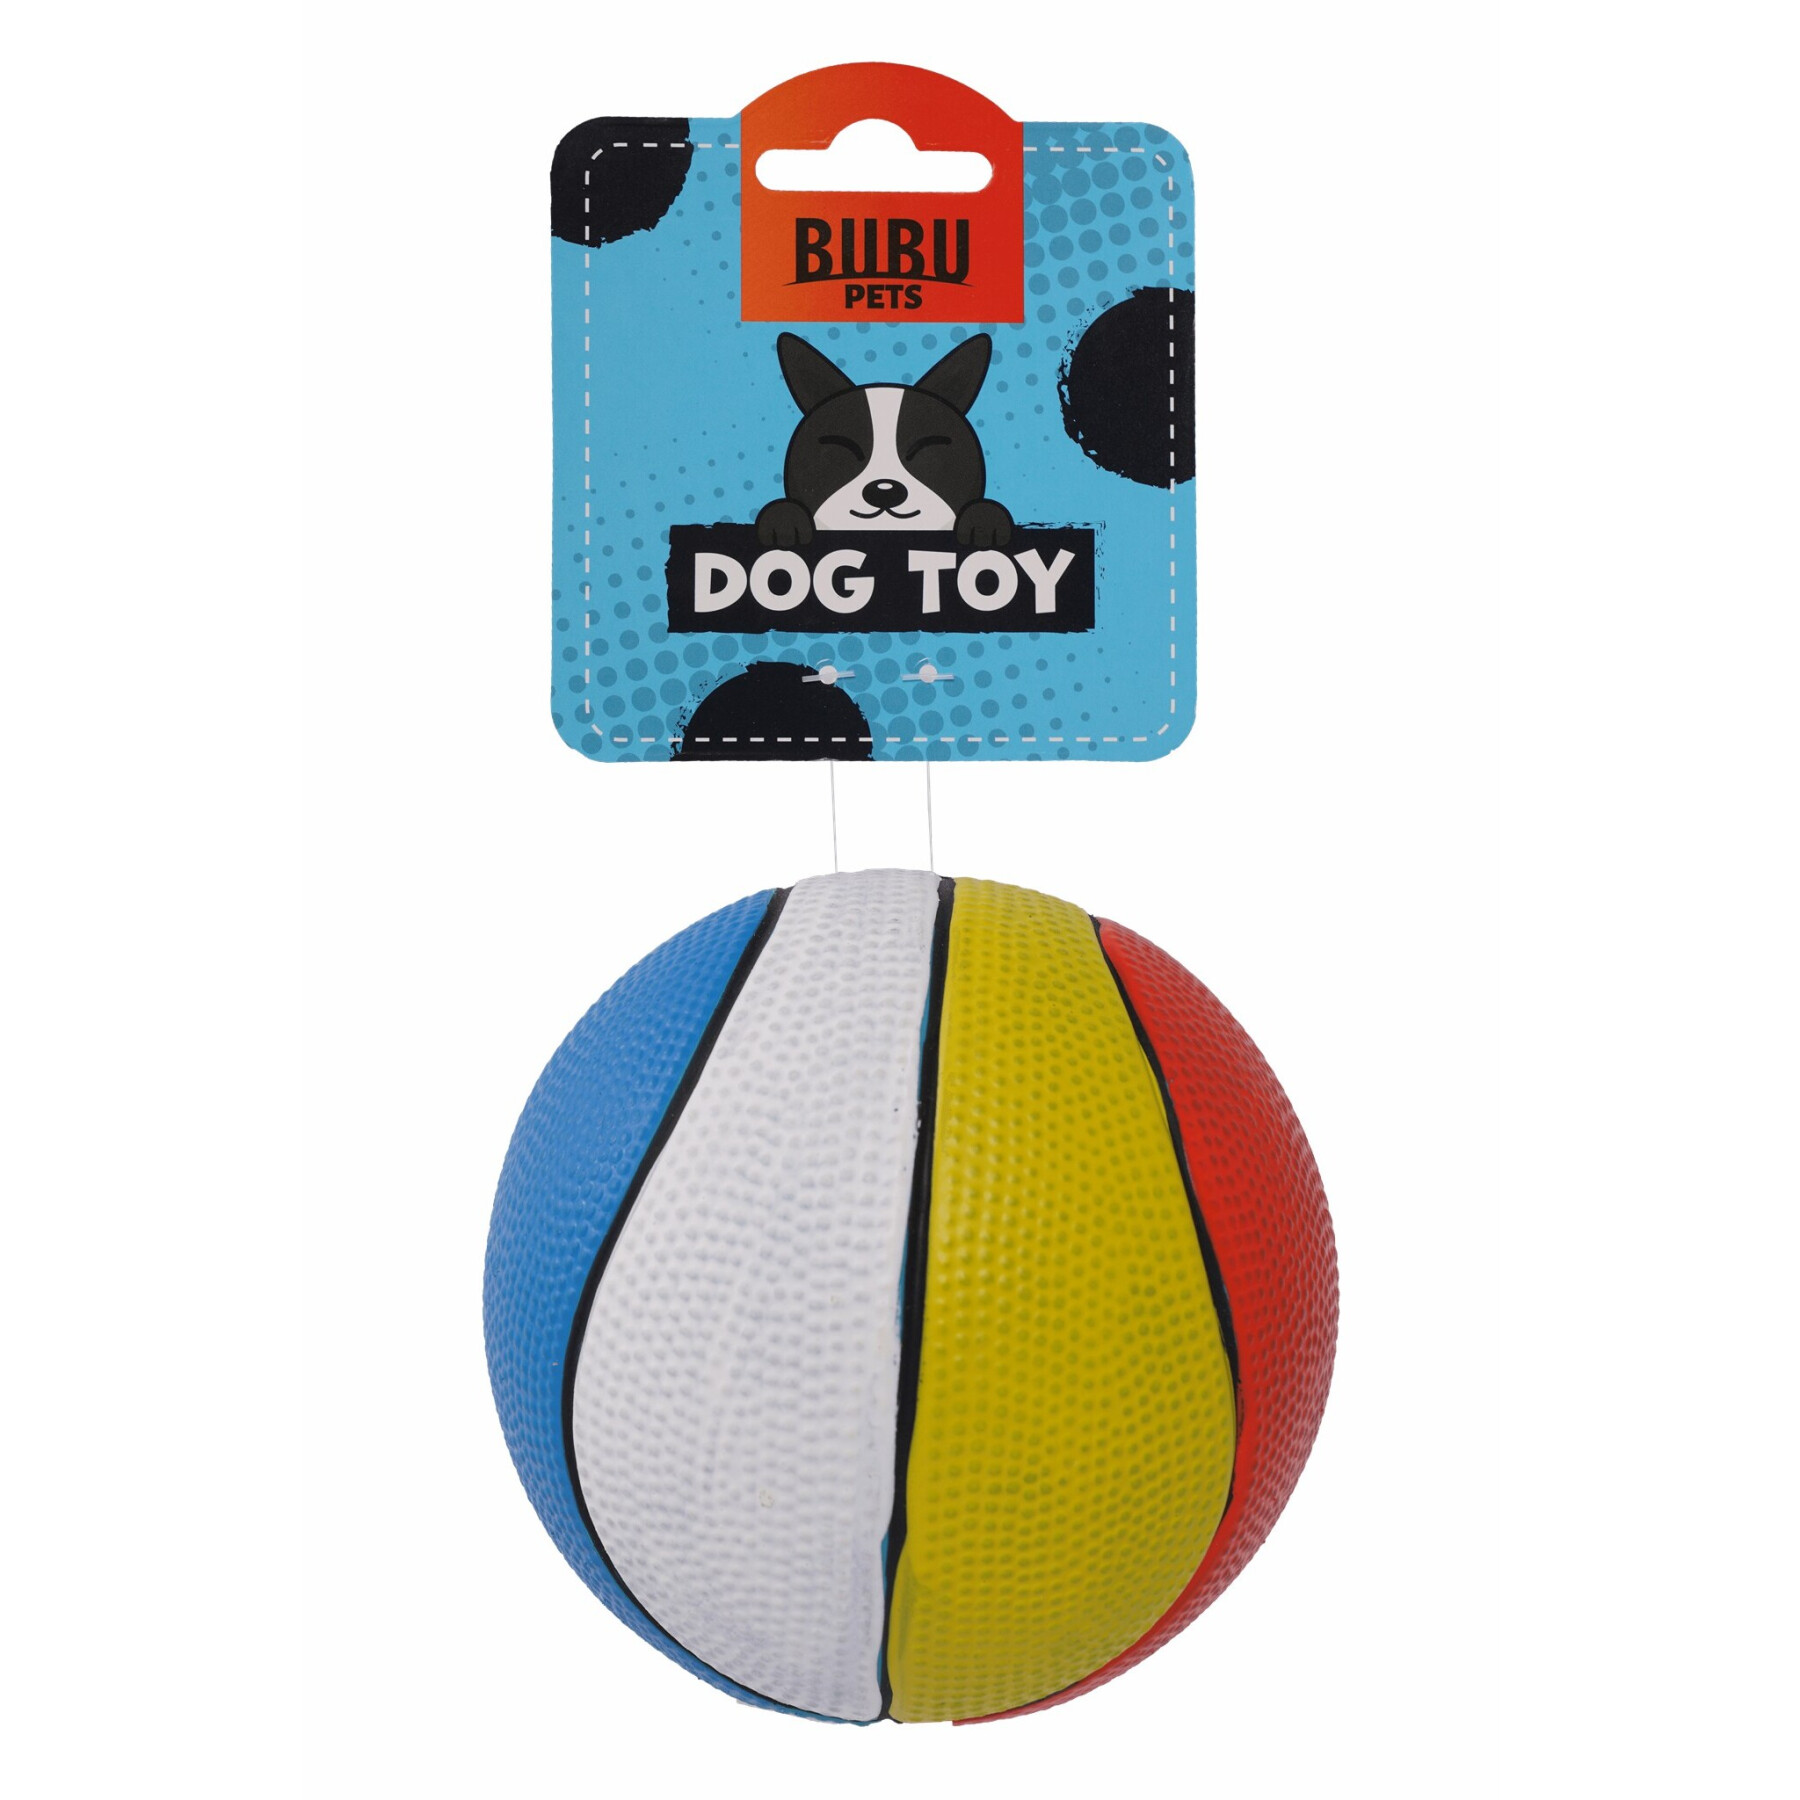 Latex sports ball toy for dogs BUBU Pets